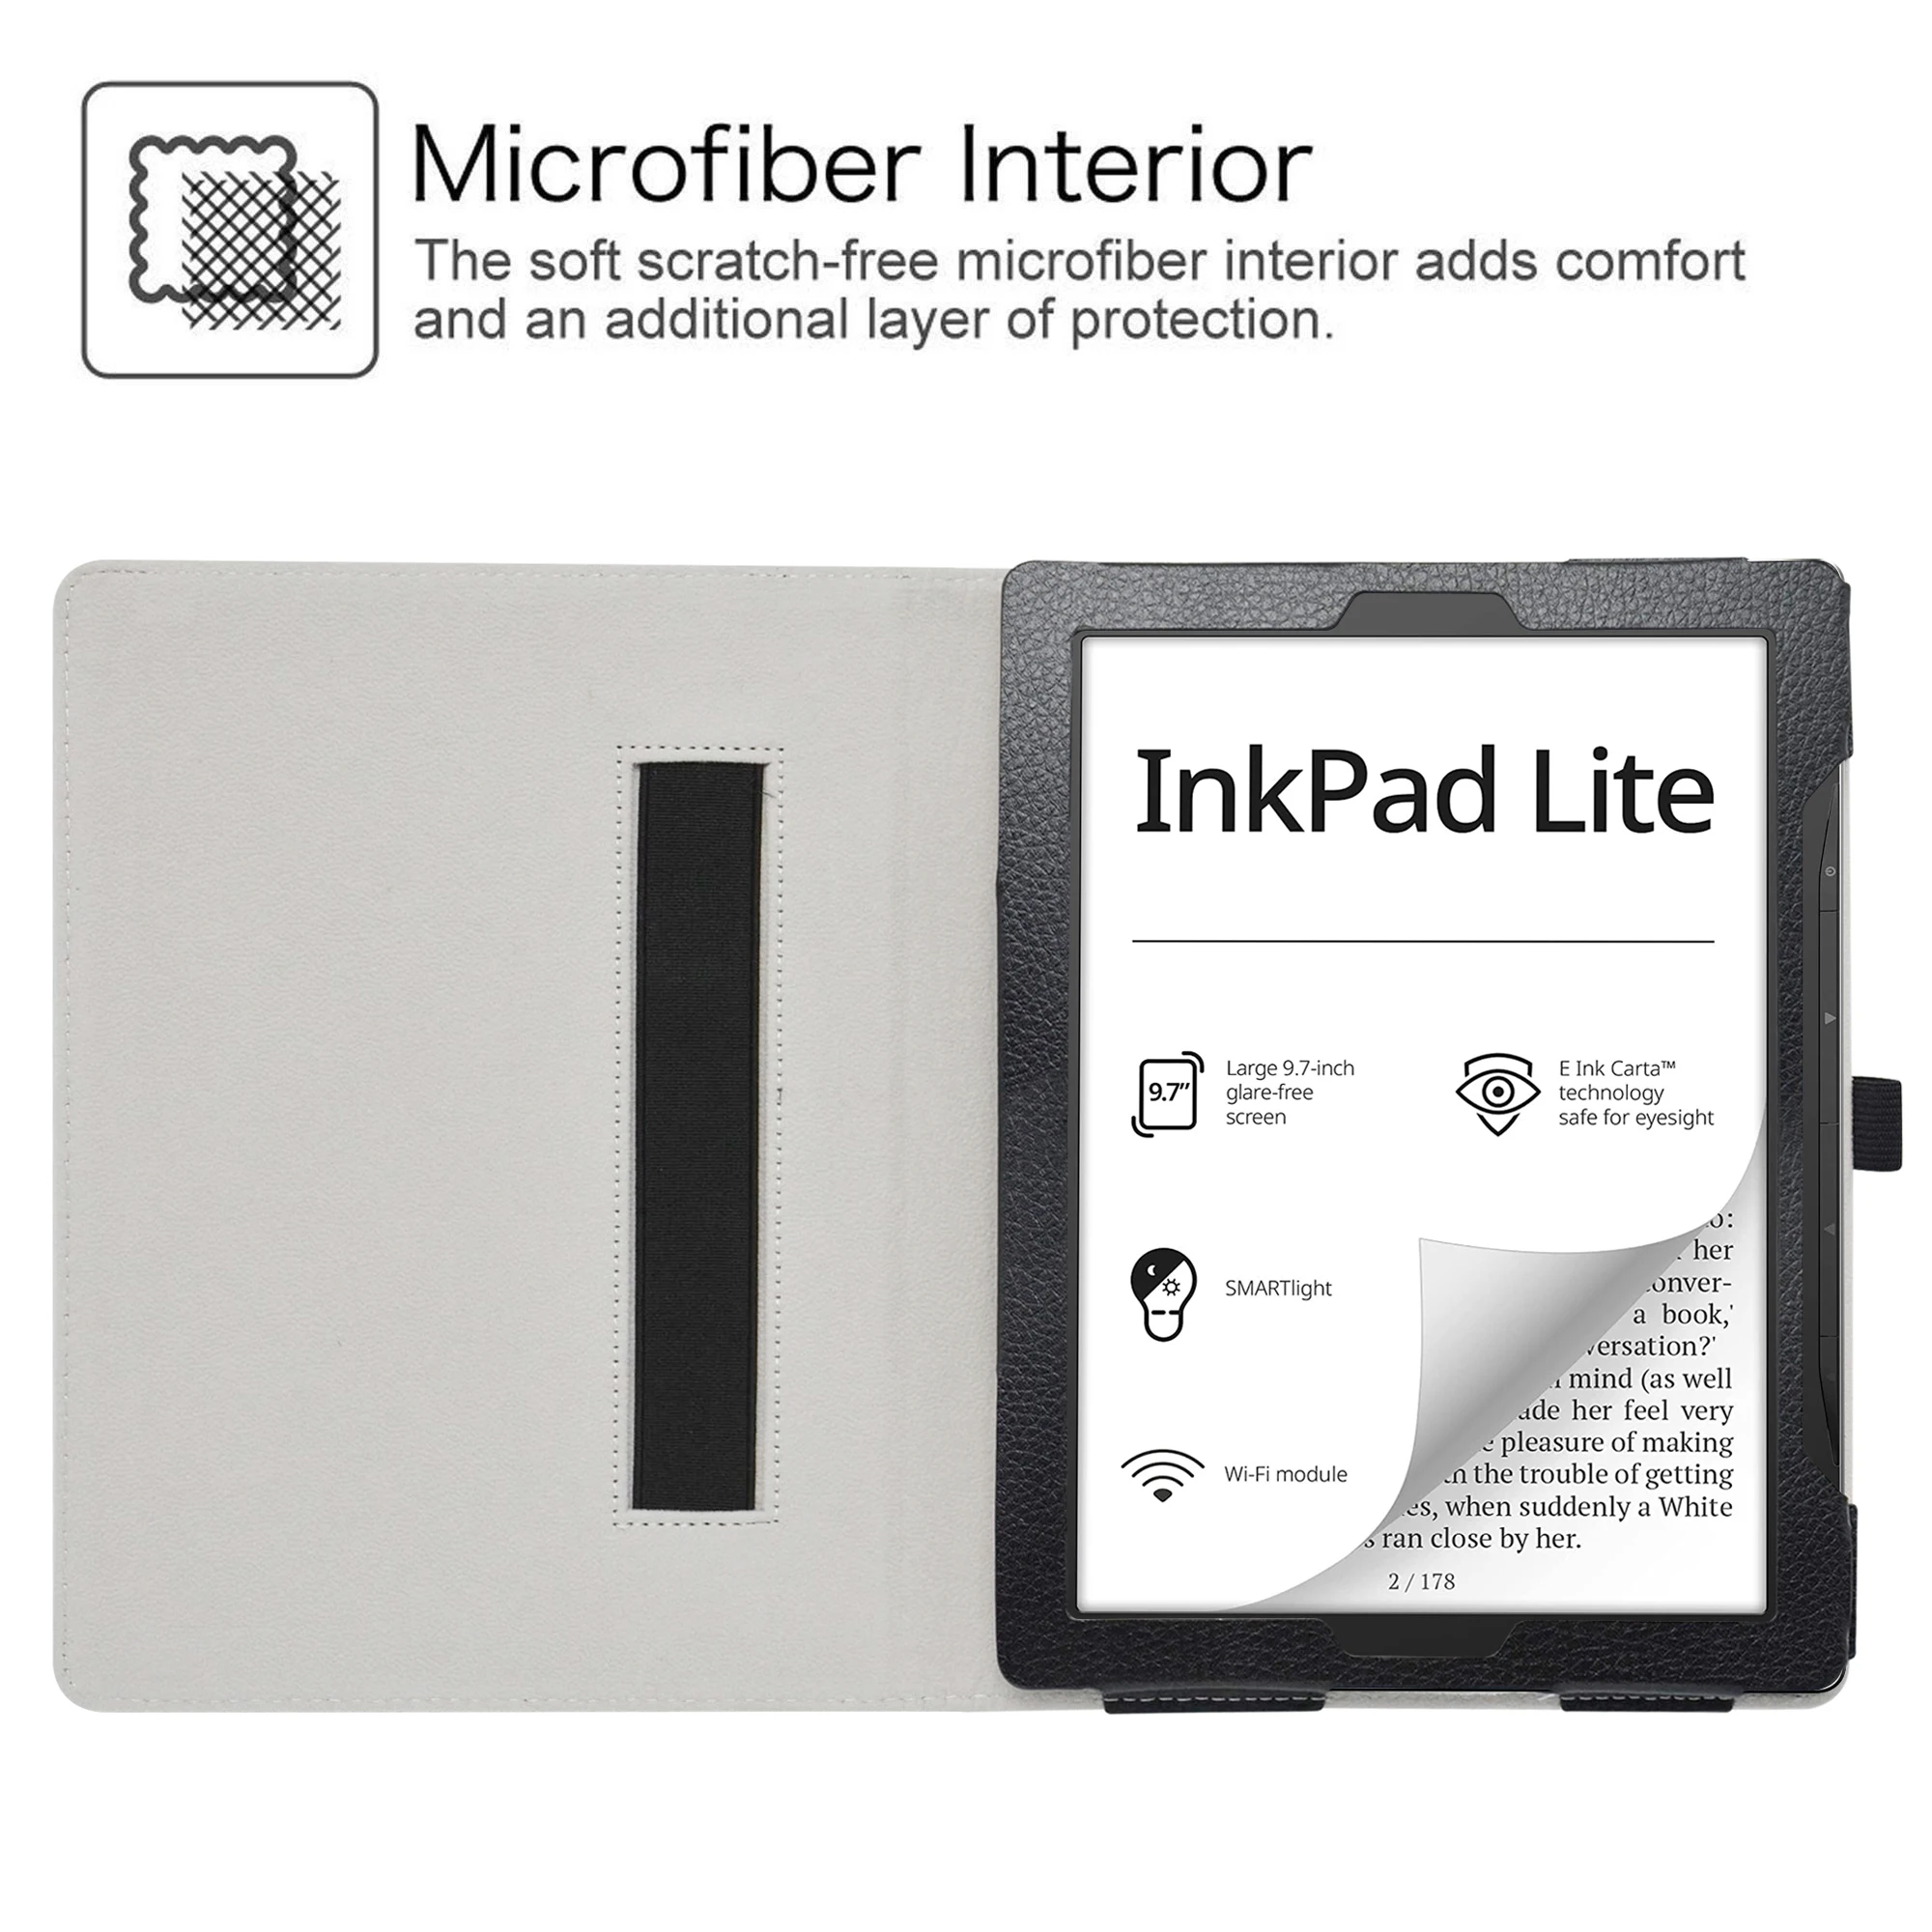 9.7″ PocketBook InkPad Lite Now Available for $279